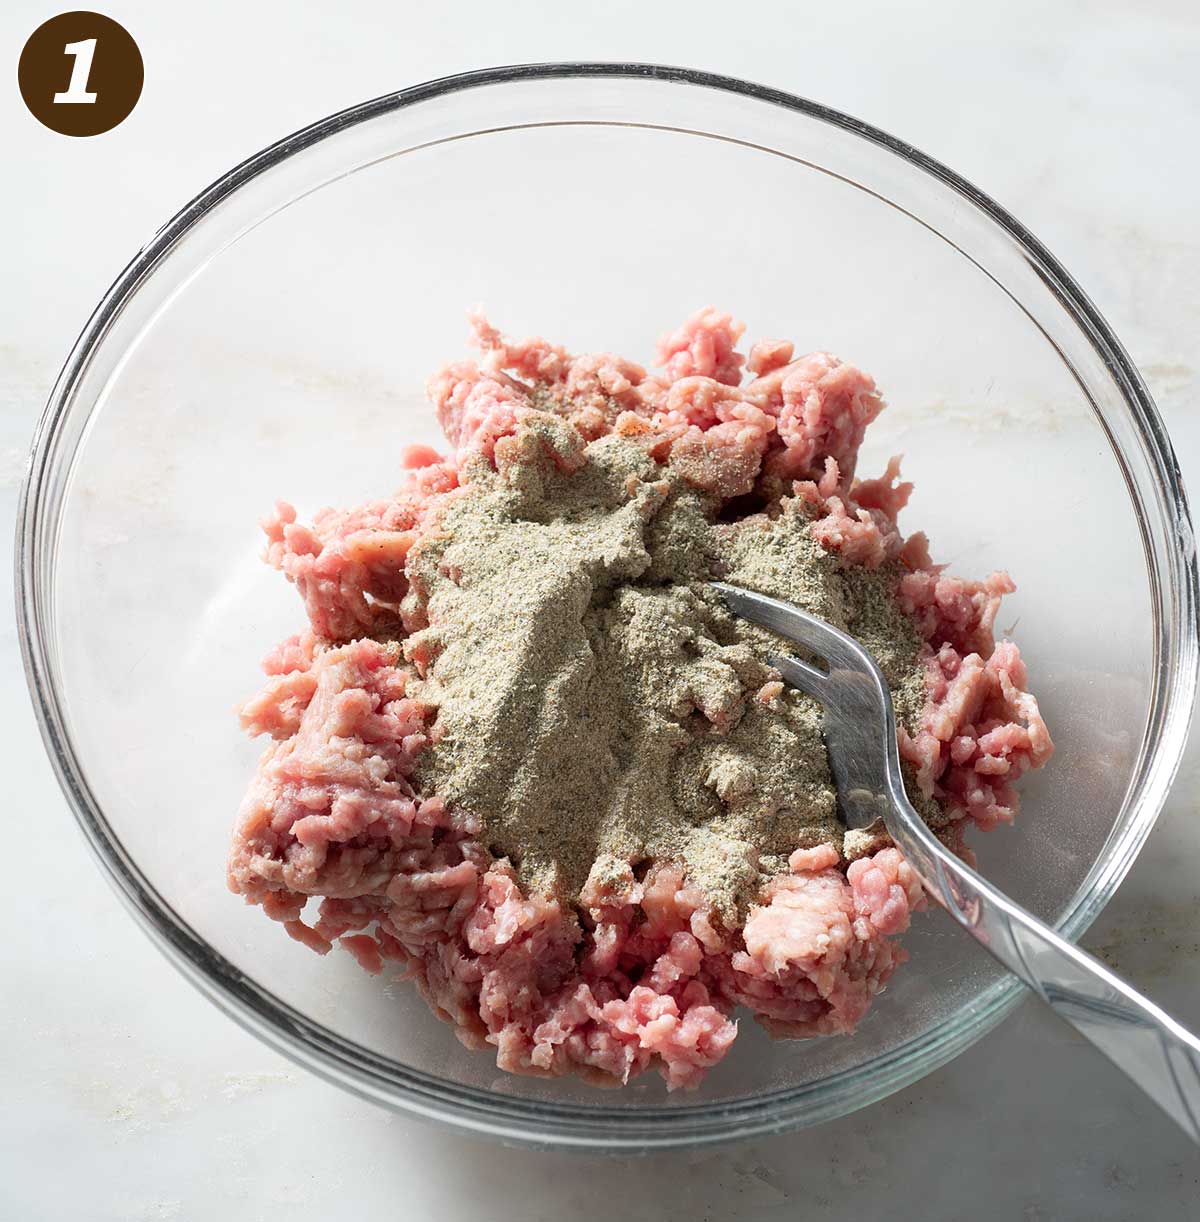 Sausage meat and seasoning in a bowl with a fork.